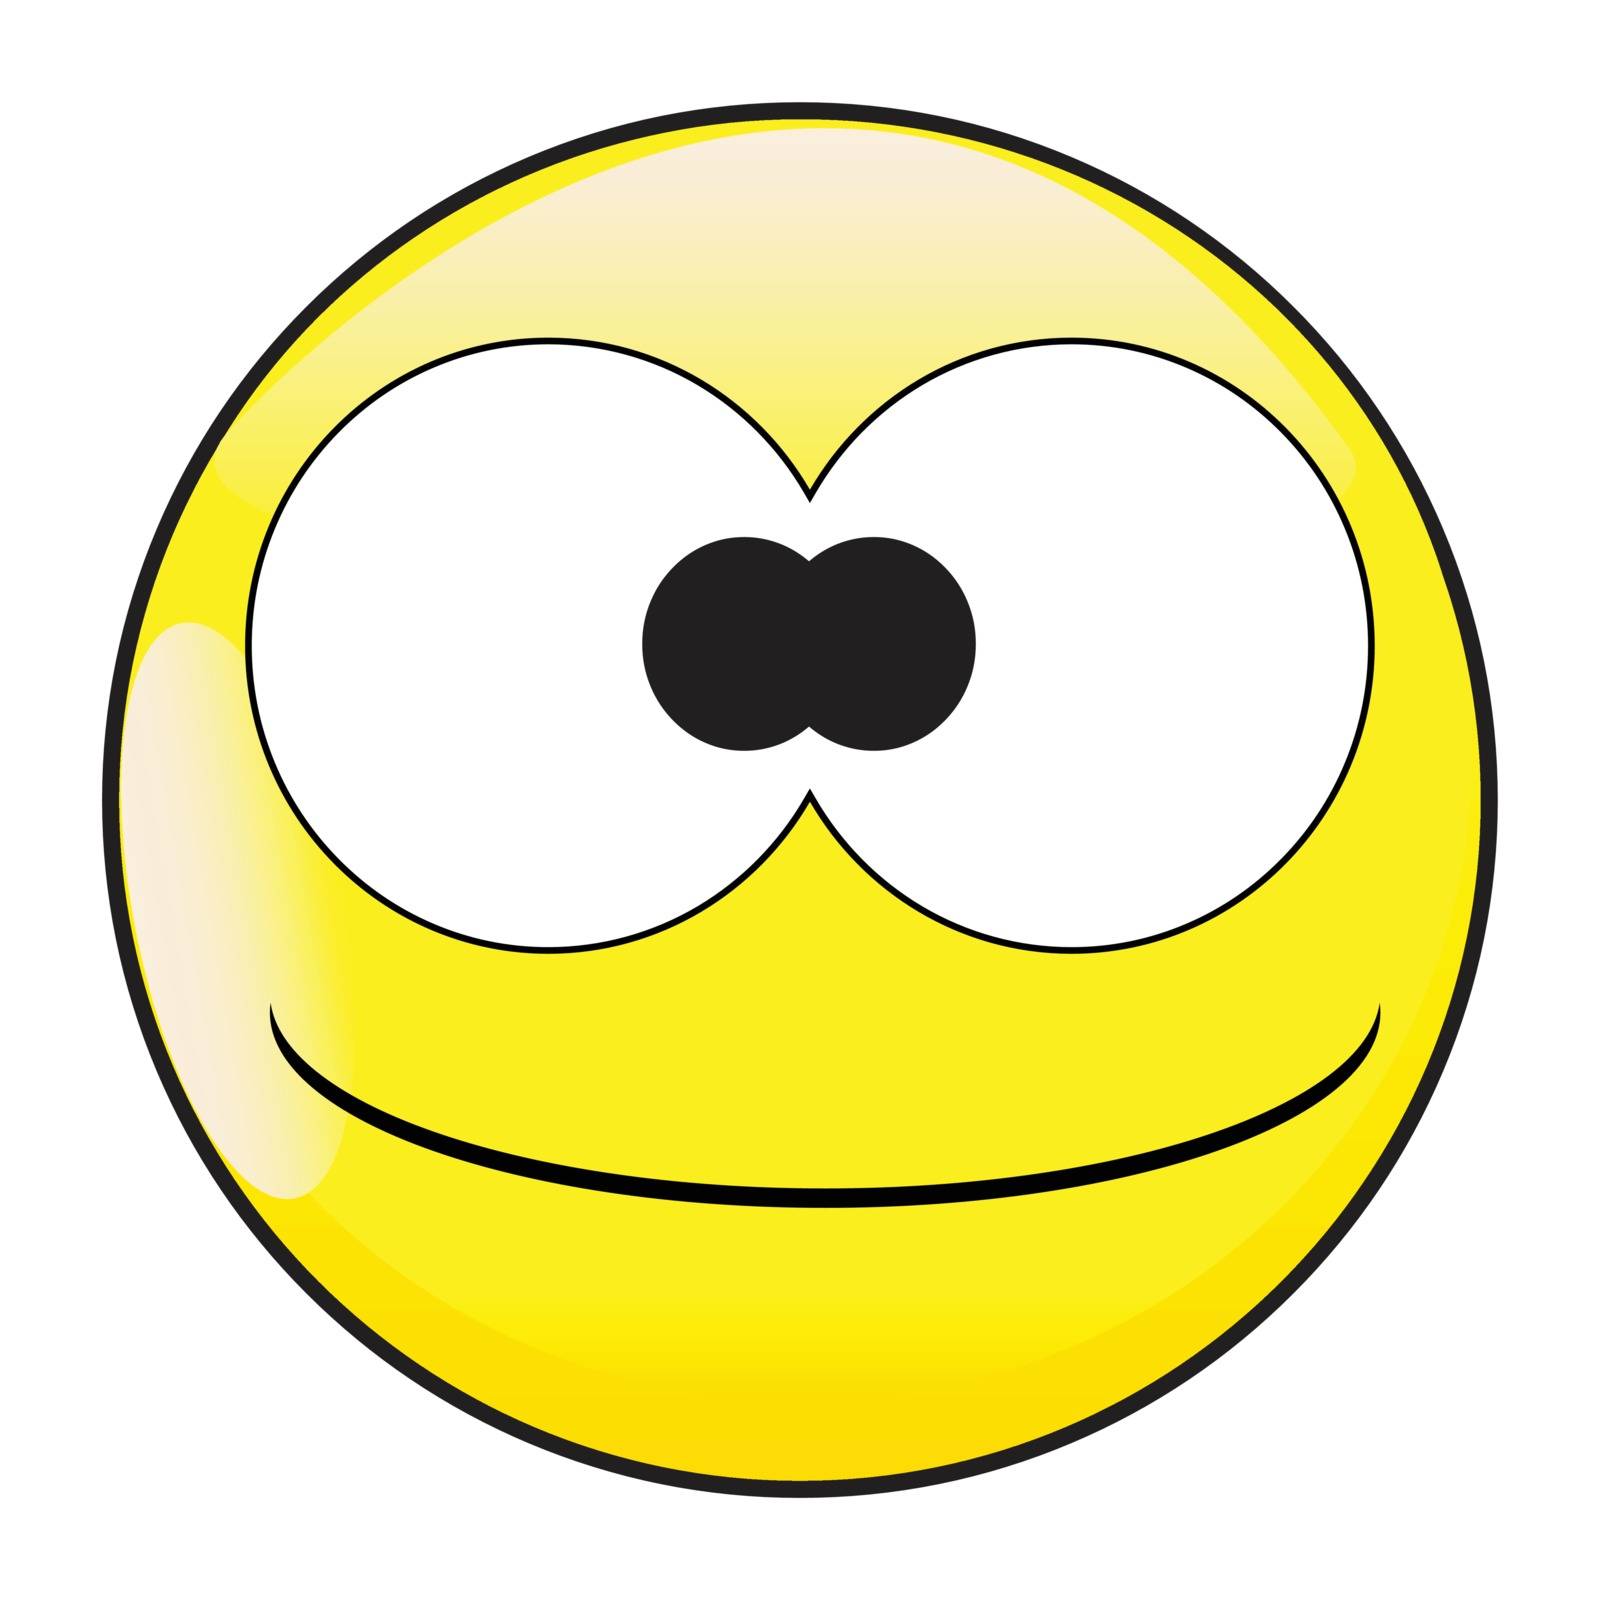 Big Eyes Stupid And Silly Smile Face Button Emoticon by Bigalbaloo